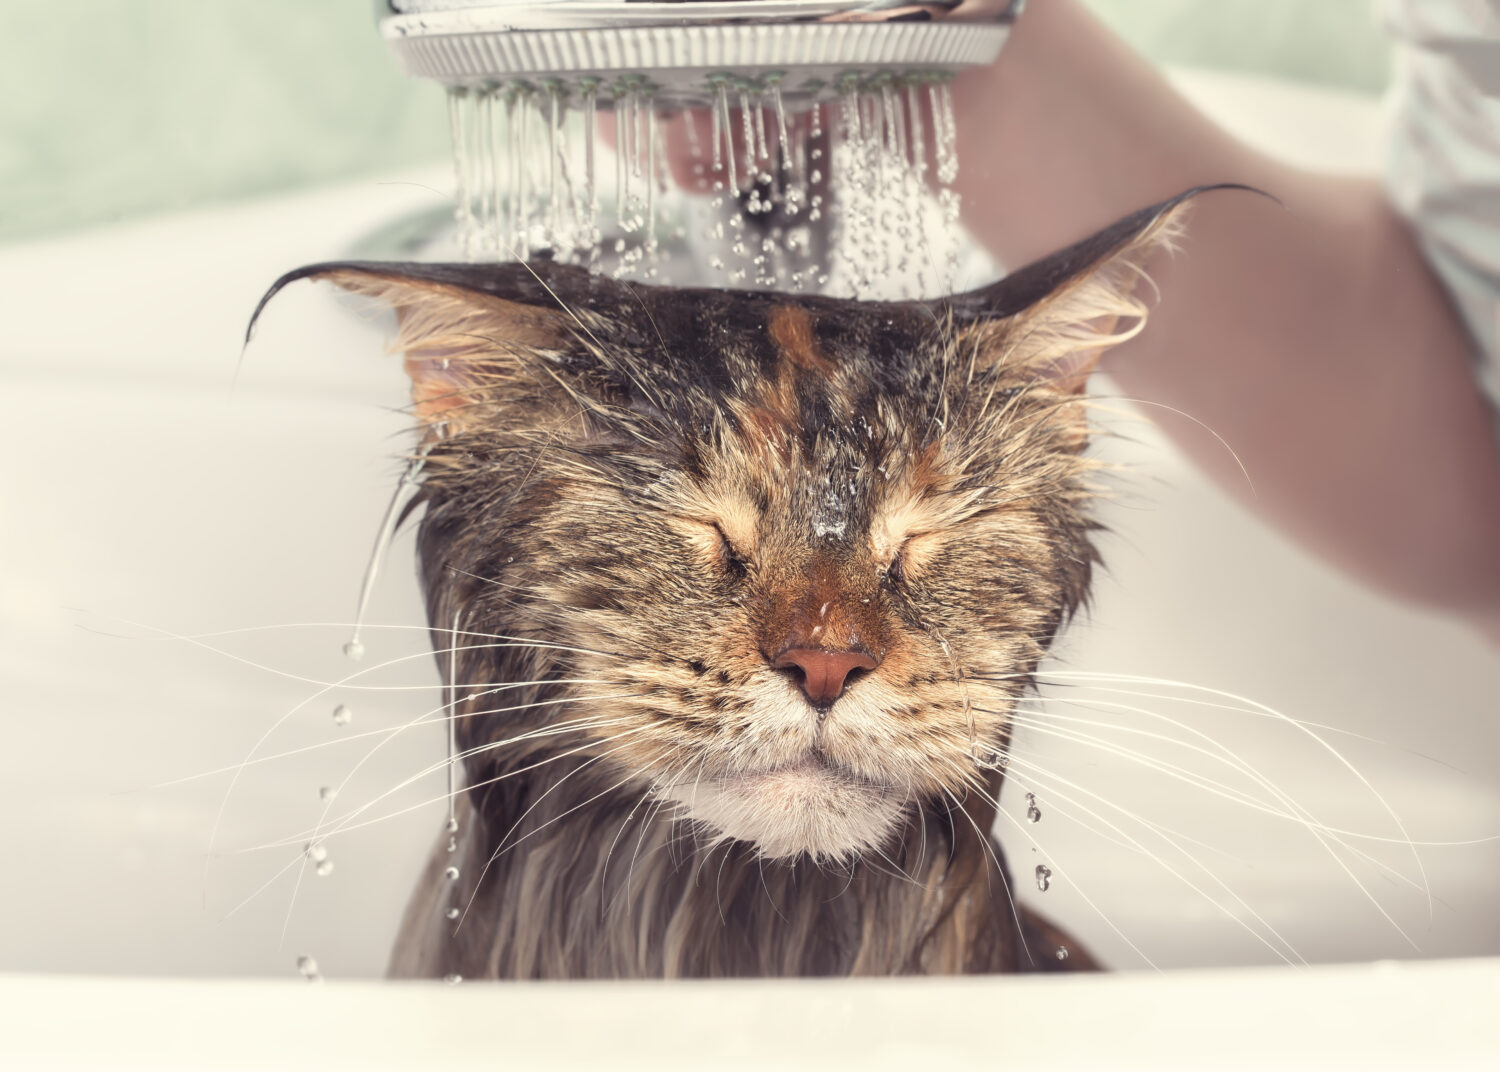 Proper hygiene is vital for a cat’s overall health. <a>©Olleg Visual Content/Shutterstock.com</a>